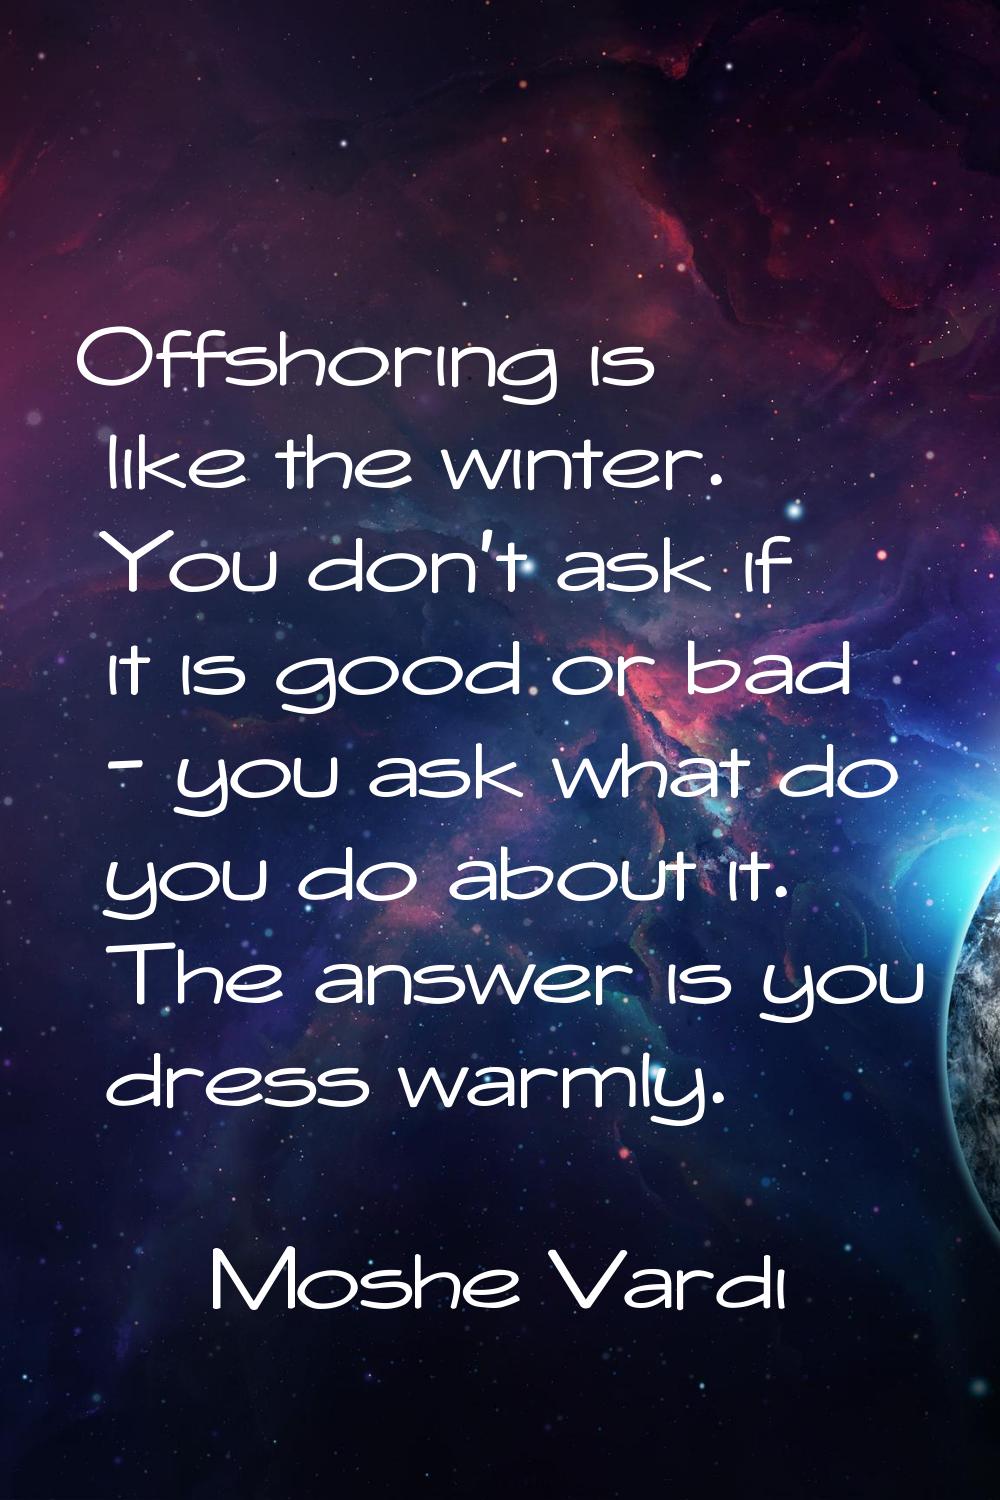 Offshoring is like the winter. You don't ask if it is good or bad - you ask what do you do about it